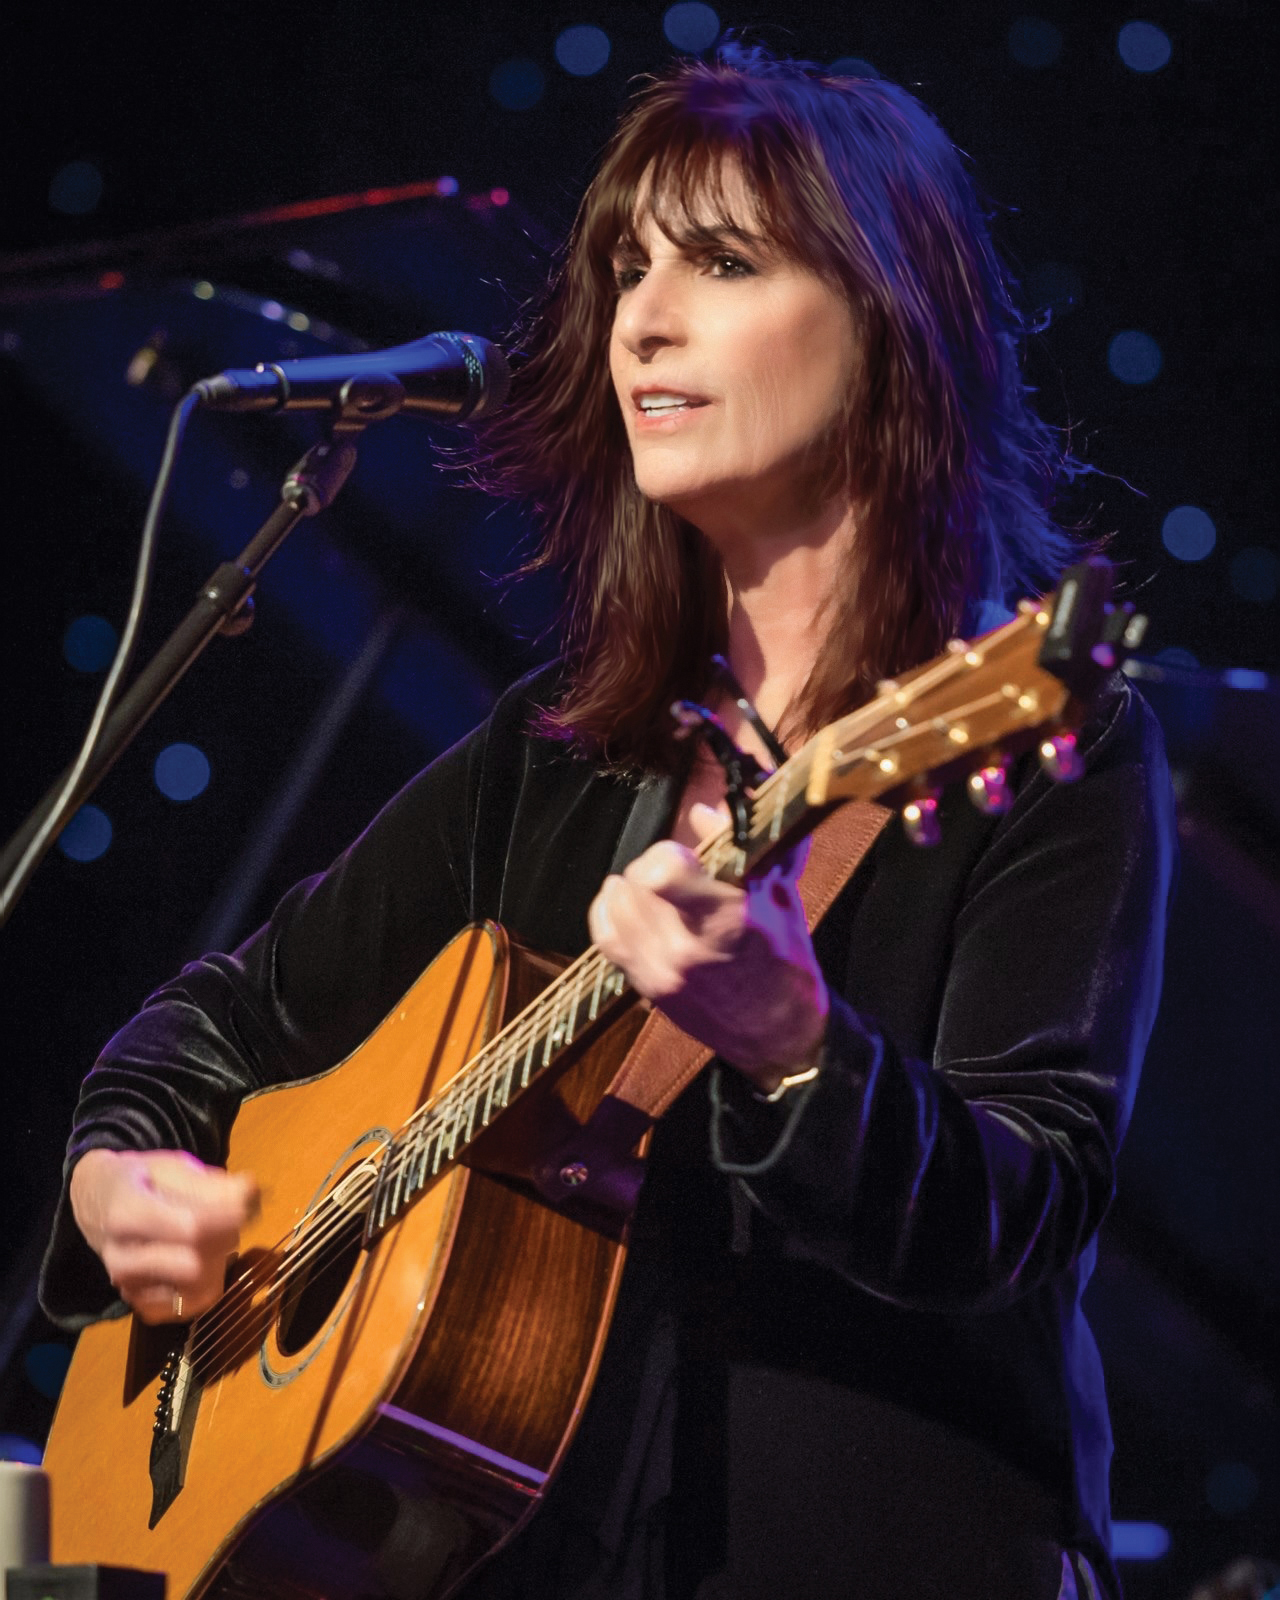 Karla Bonoff - Publicity Image - "Home for the Holidays Tour"